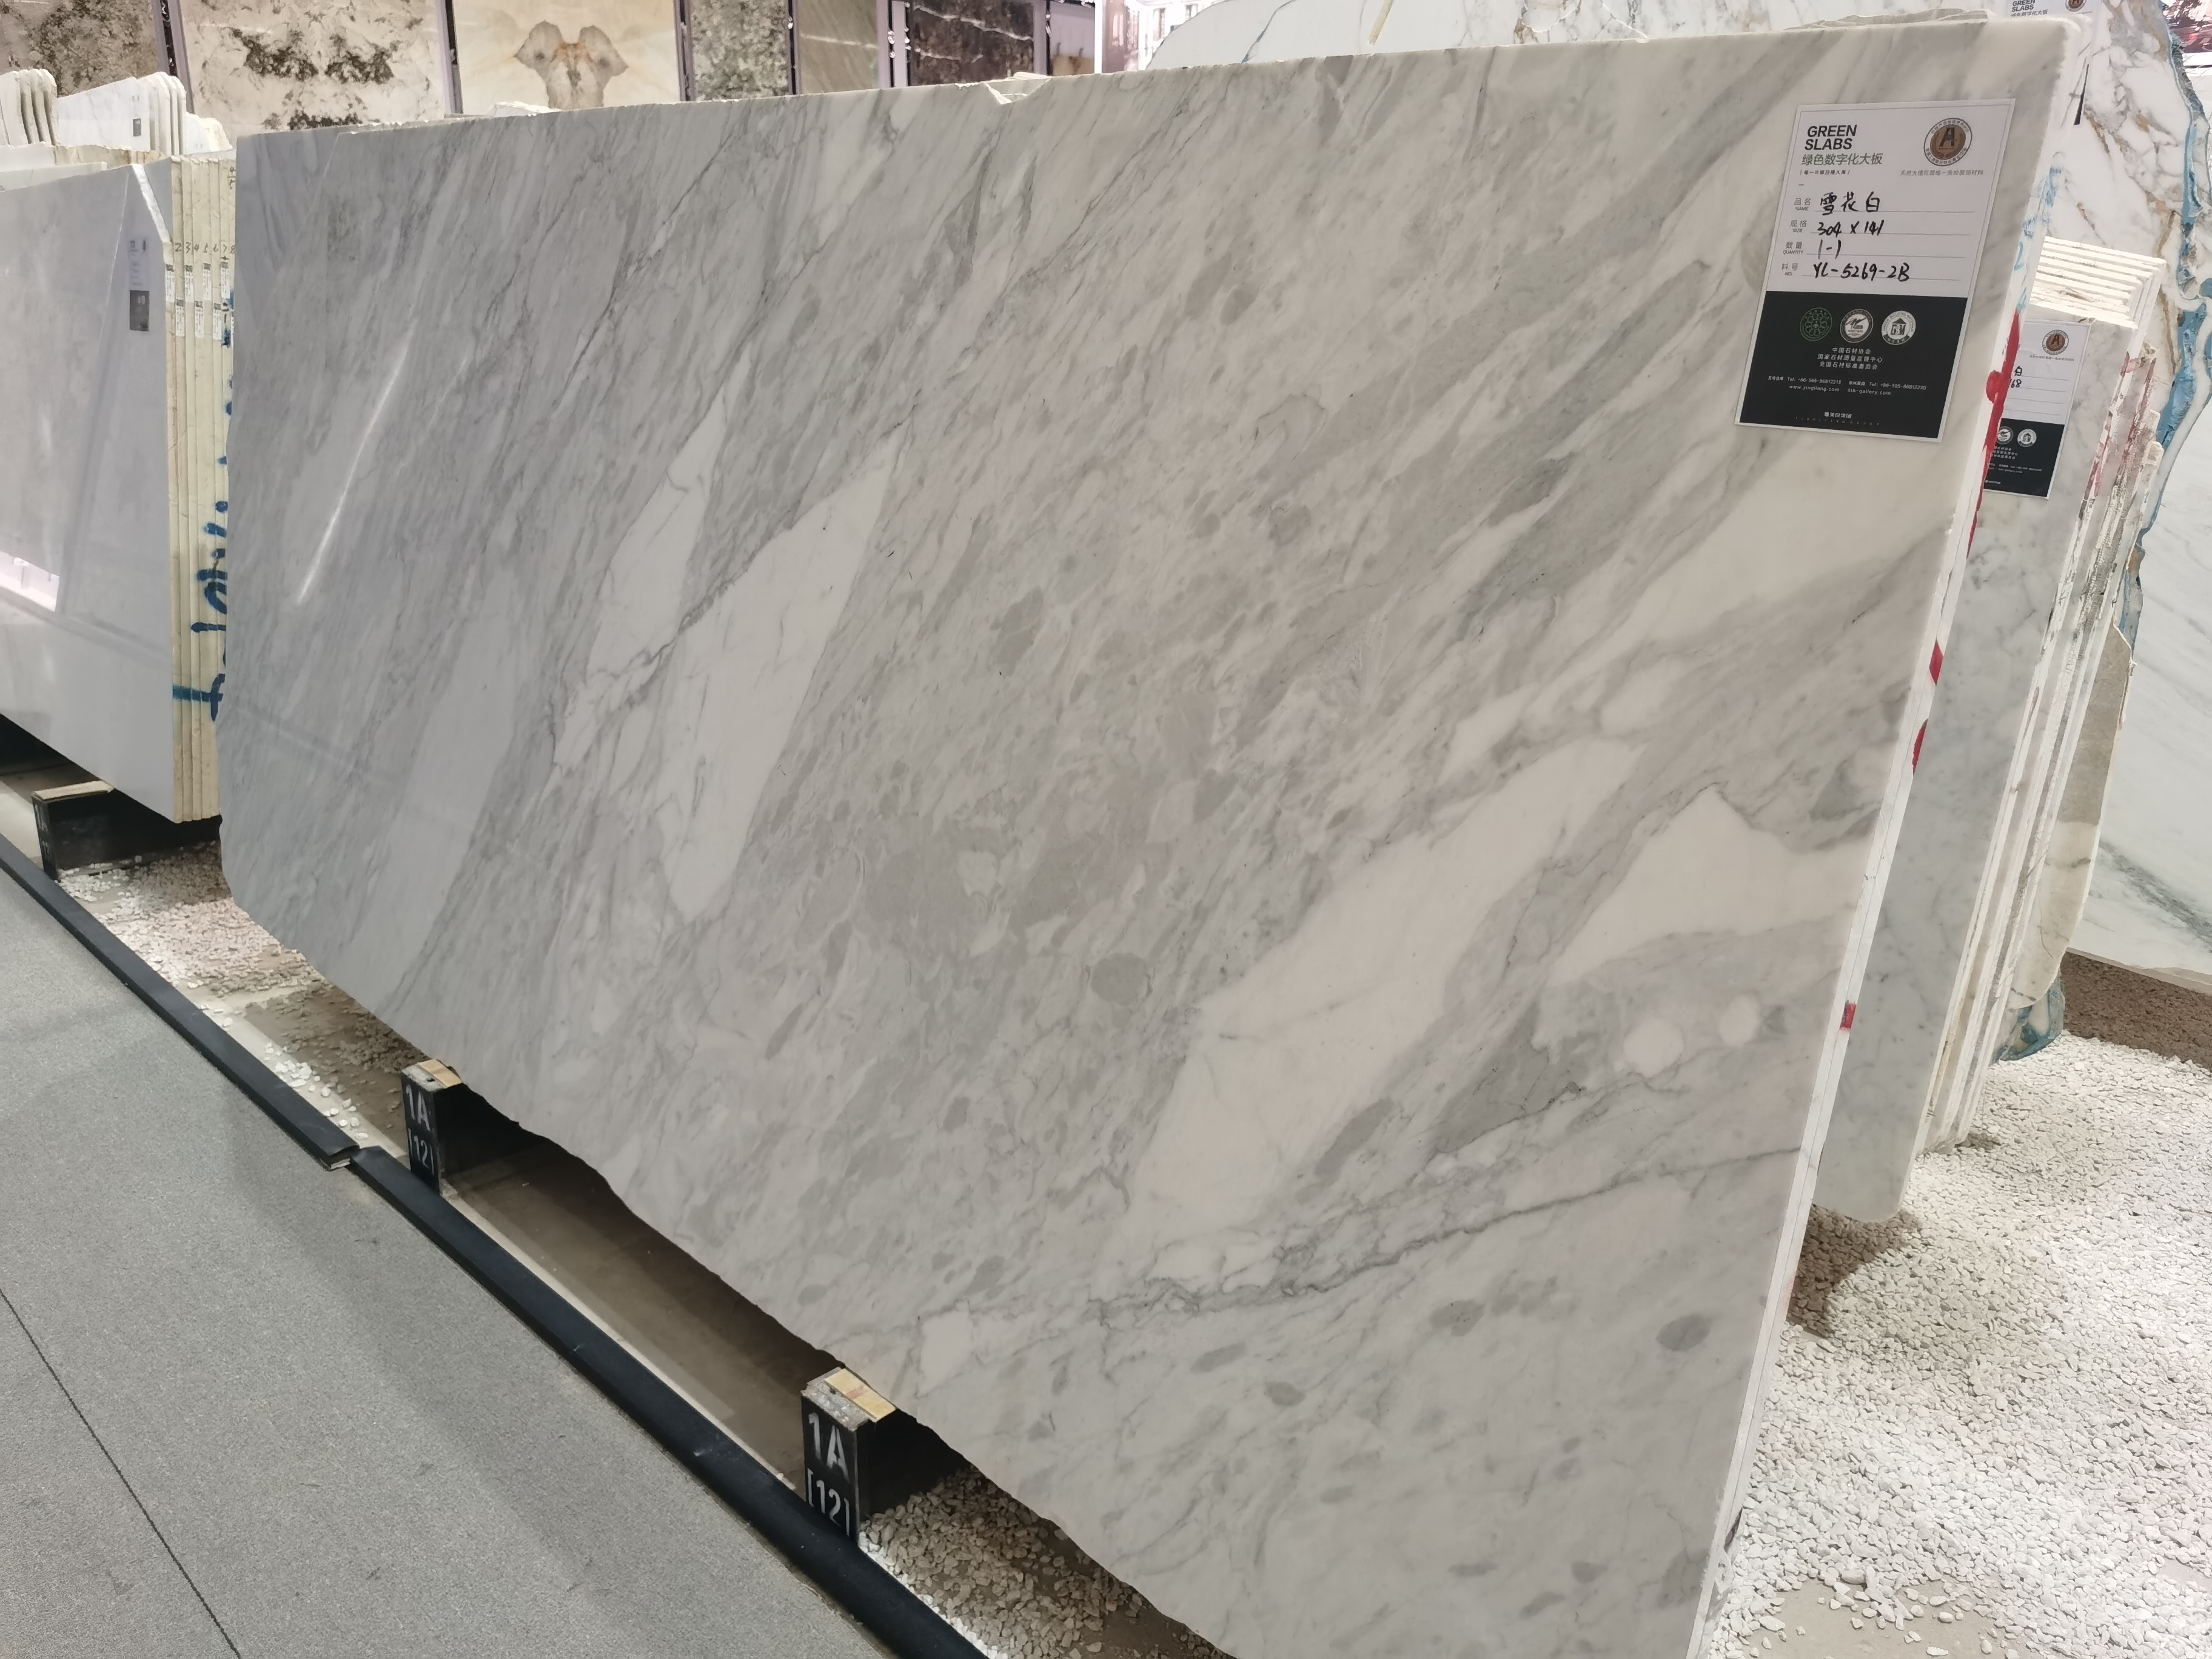  ArabescatoCorchia Marble(Snow White Marble) Stone Slab Tiles for Wall Floor Decor